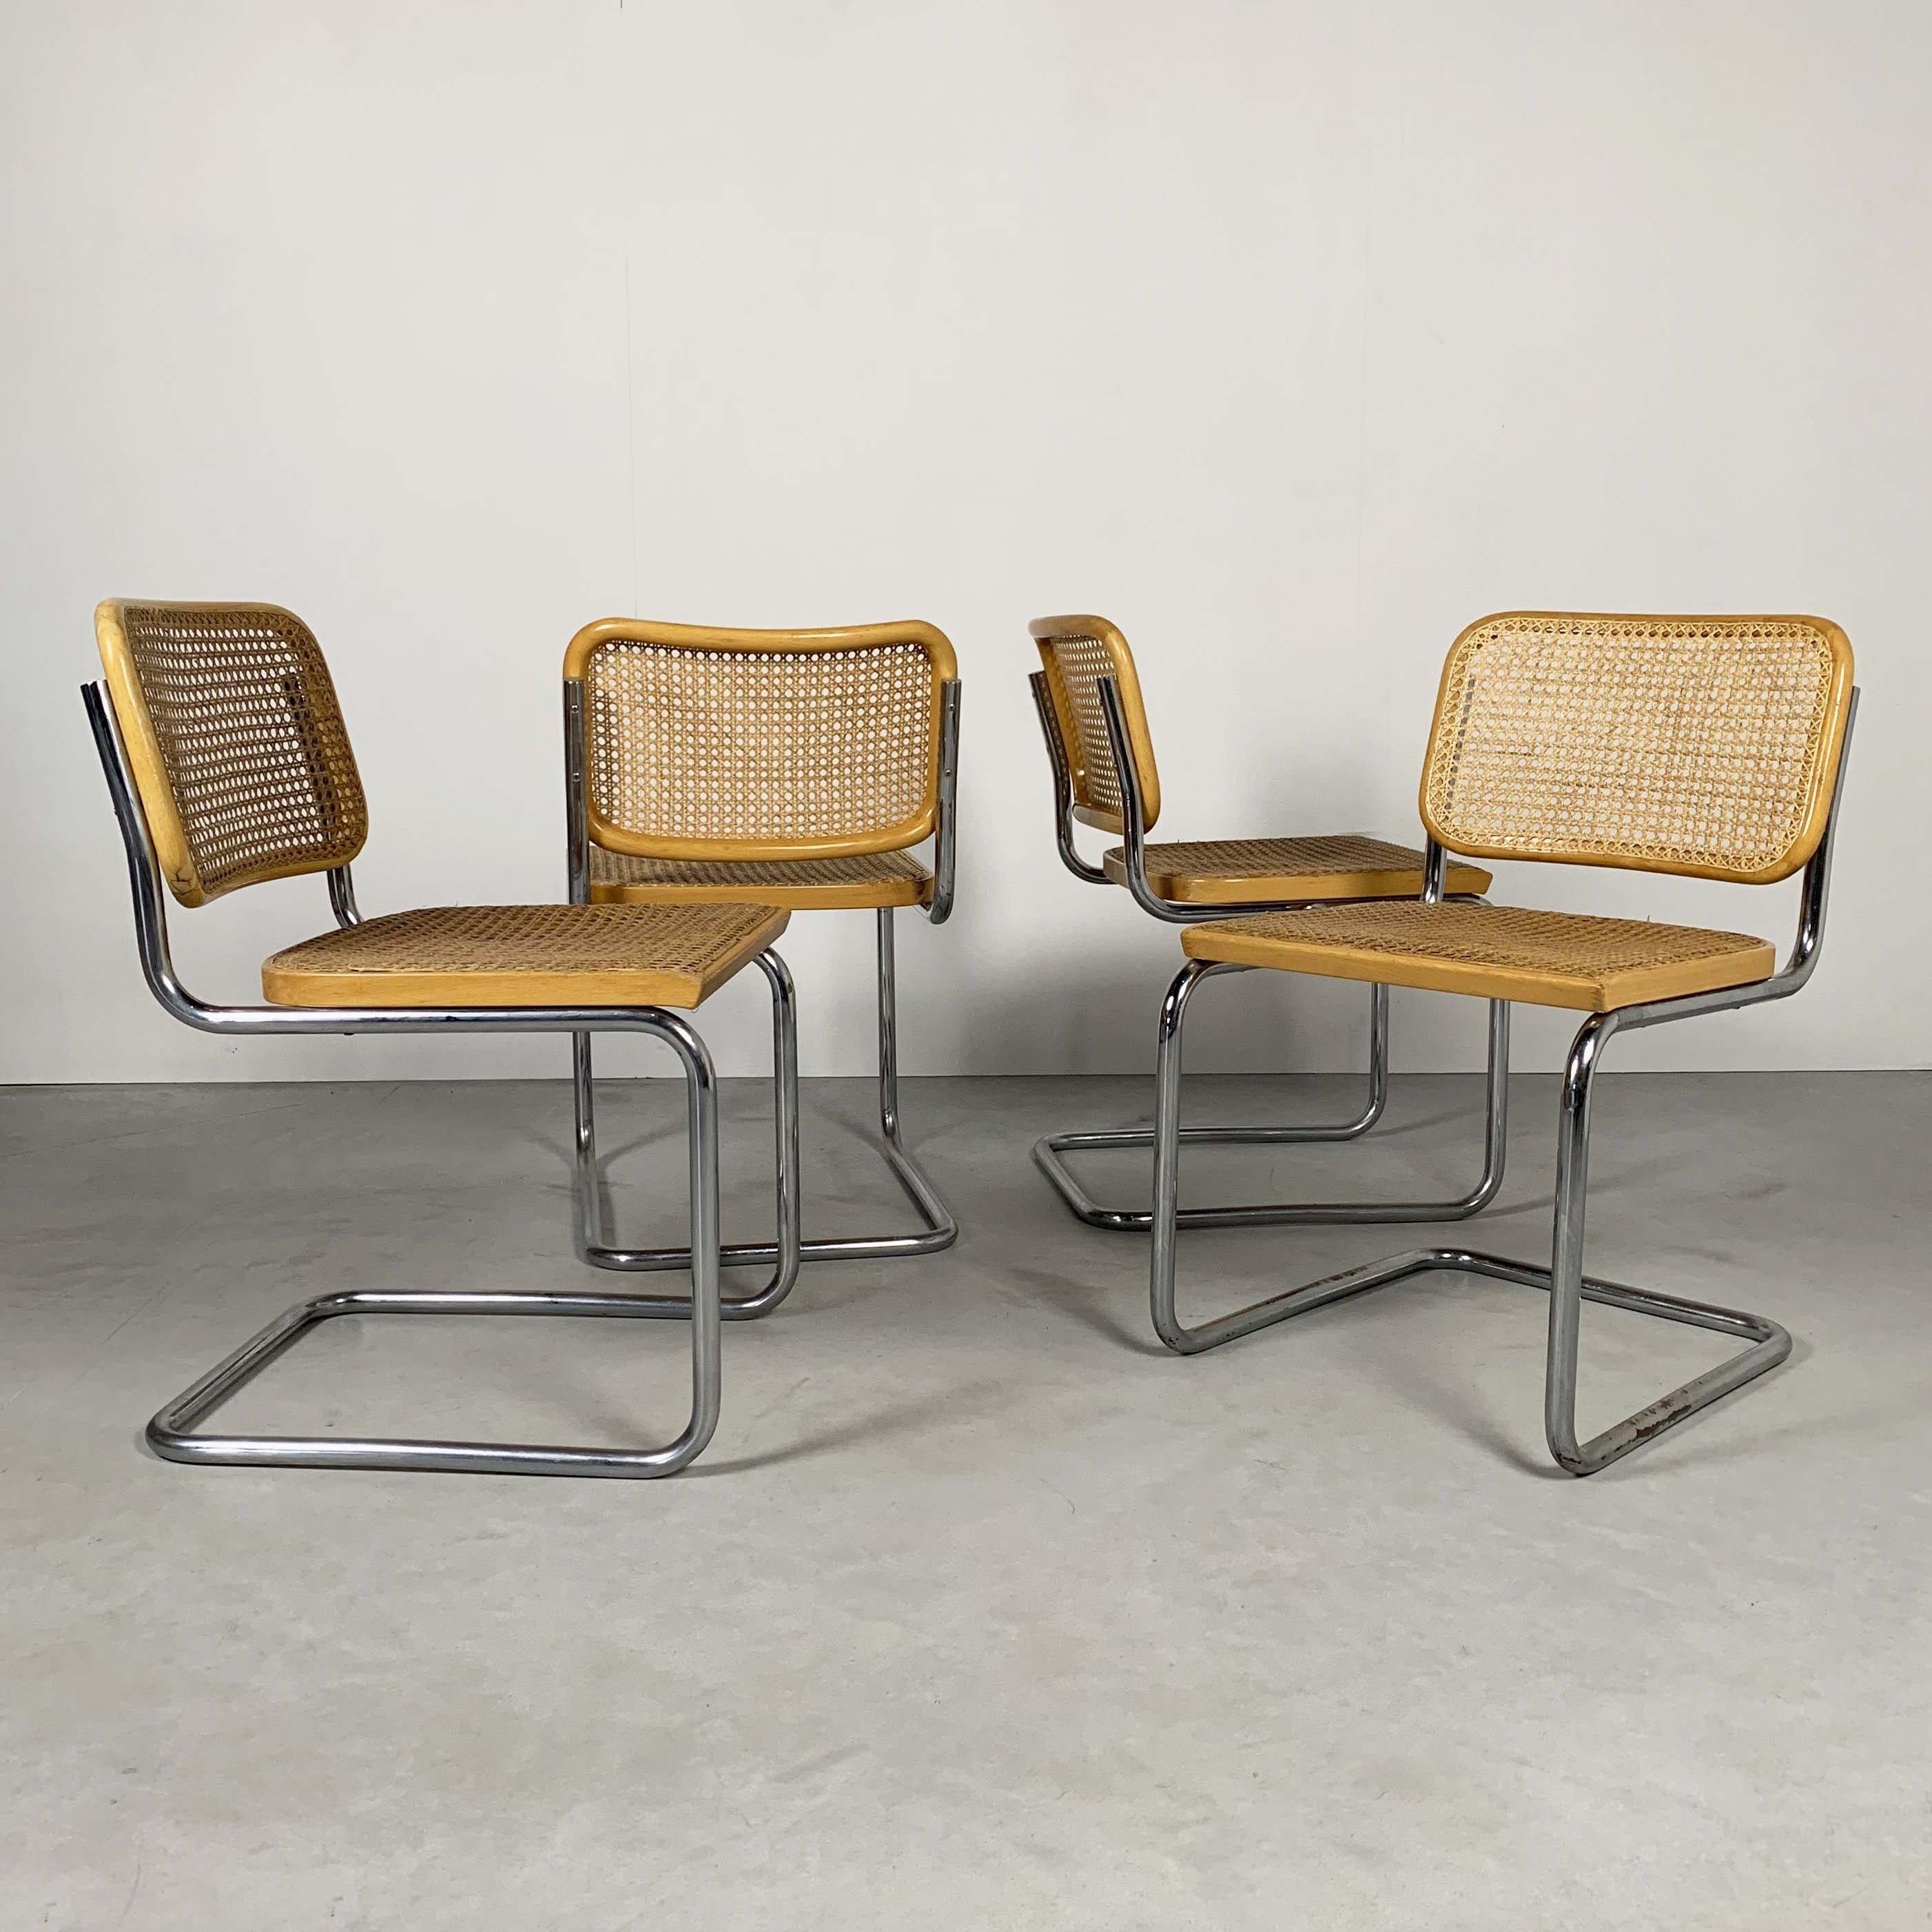 4 Cesca chairs by Marcel Breuer for Gavina, 1970s. Cane seats and backs. Natural finish. Classic chrome cantilever frames.

Sold in sets of 2, we have 4 available